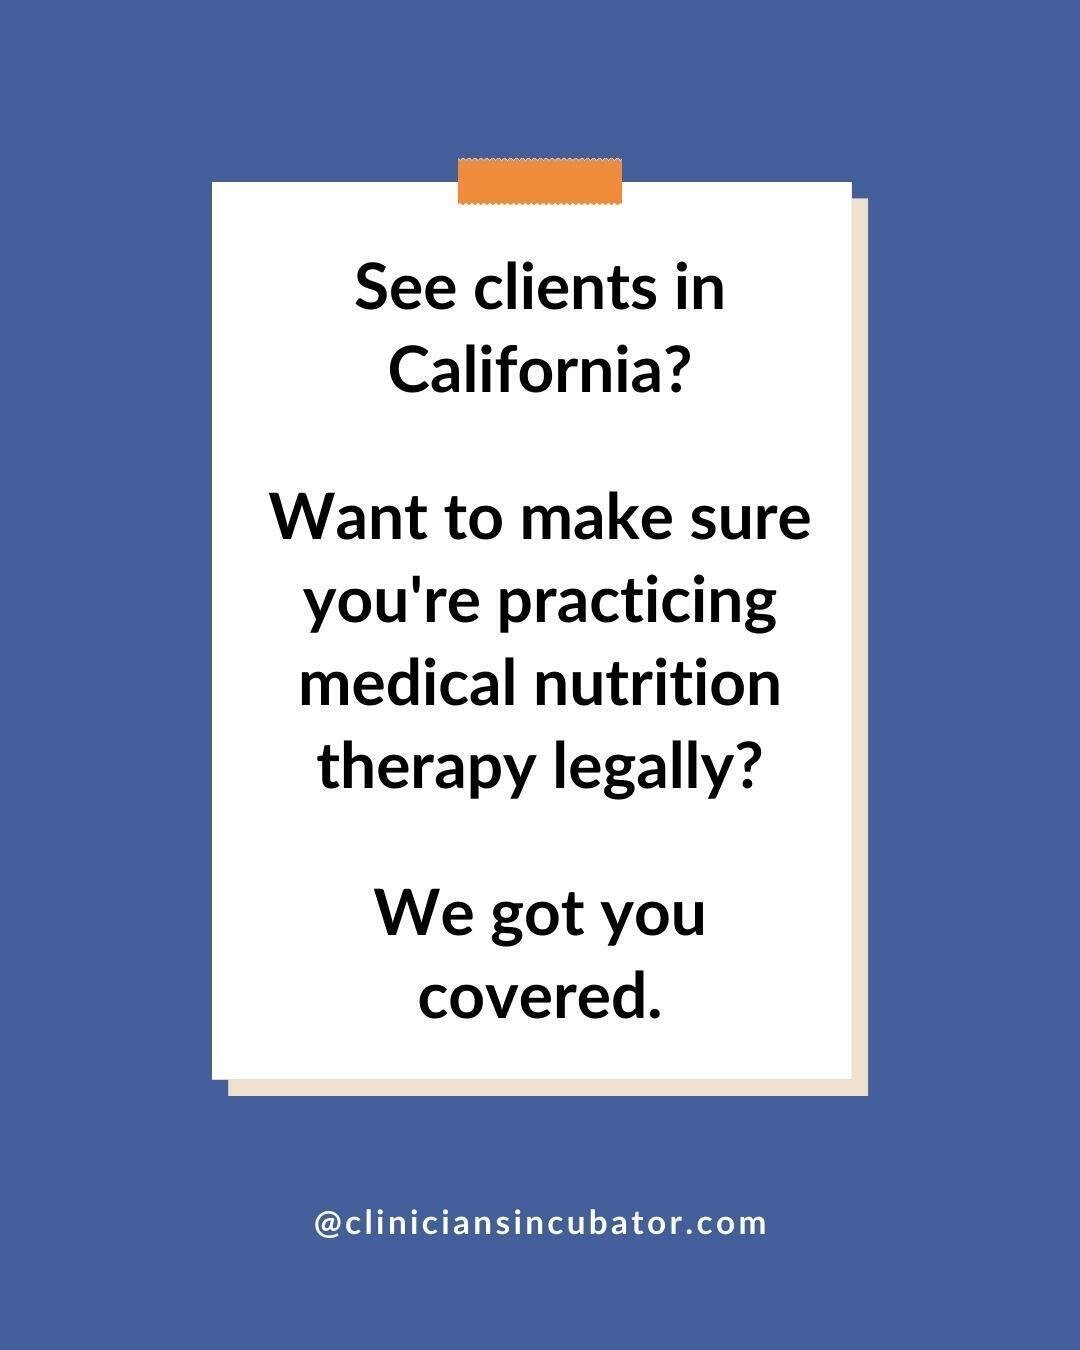 You still have today to register! 

Join CNS Supervisor Alyson Roux tomorrow for a workshop on how to practice medical nutrition therapy legally in California. You don't want to miss it!

Wednesday, May 10 at 1 p.m. EST

Register now - link in bio.